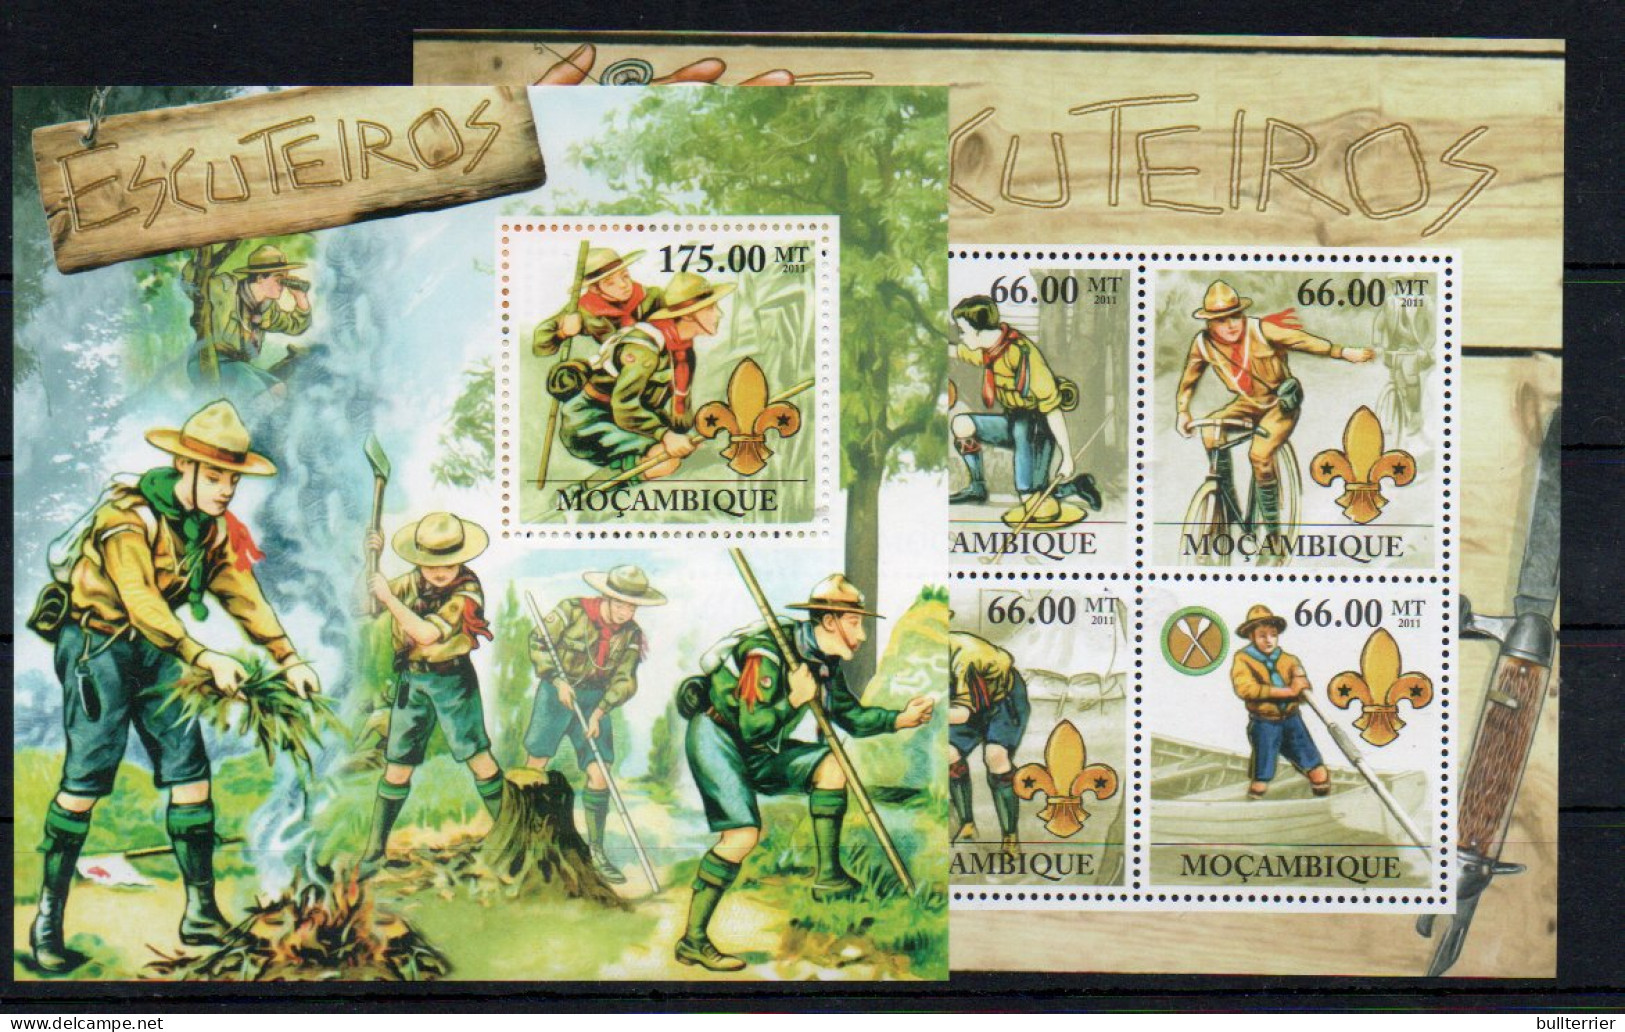 SCOUTS - MOZAMBIQUE - 2012 - SCOUTS SHEETLET OF 4 + SOUVENIR SHEET  MINT NEVER HINGED - Unused Stamps